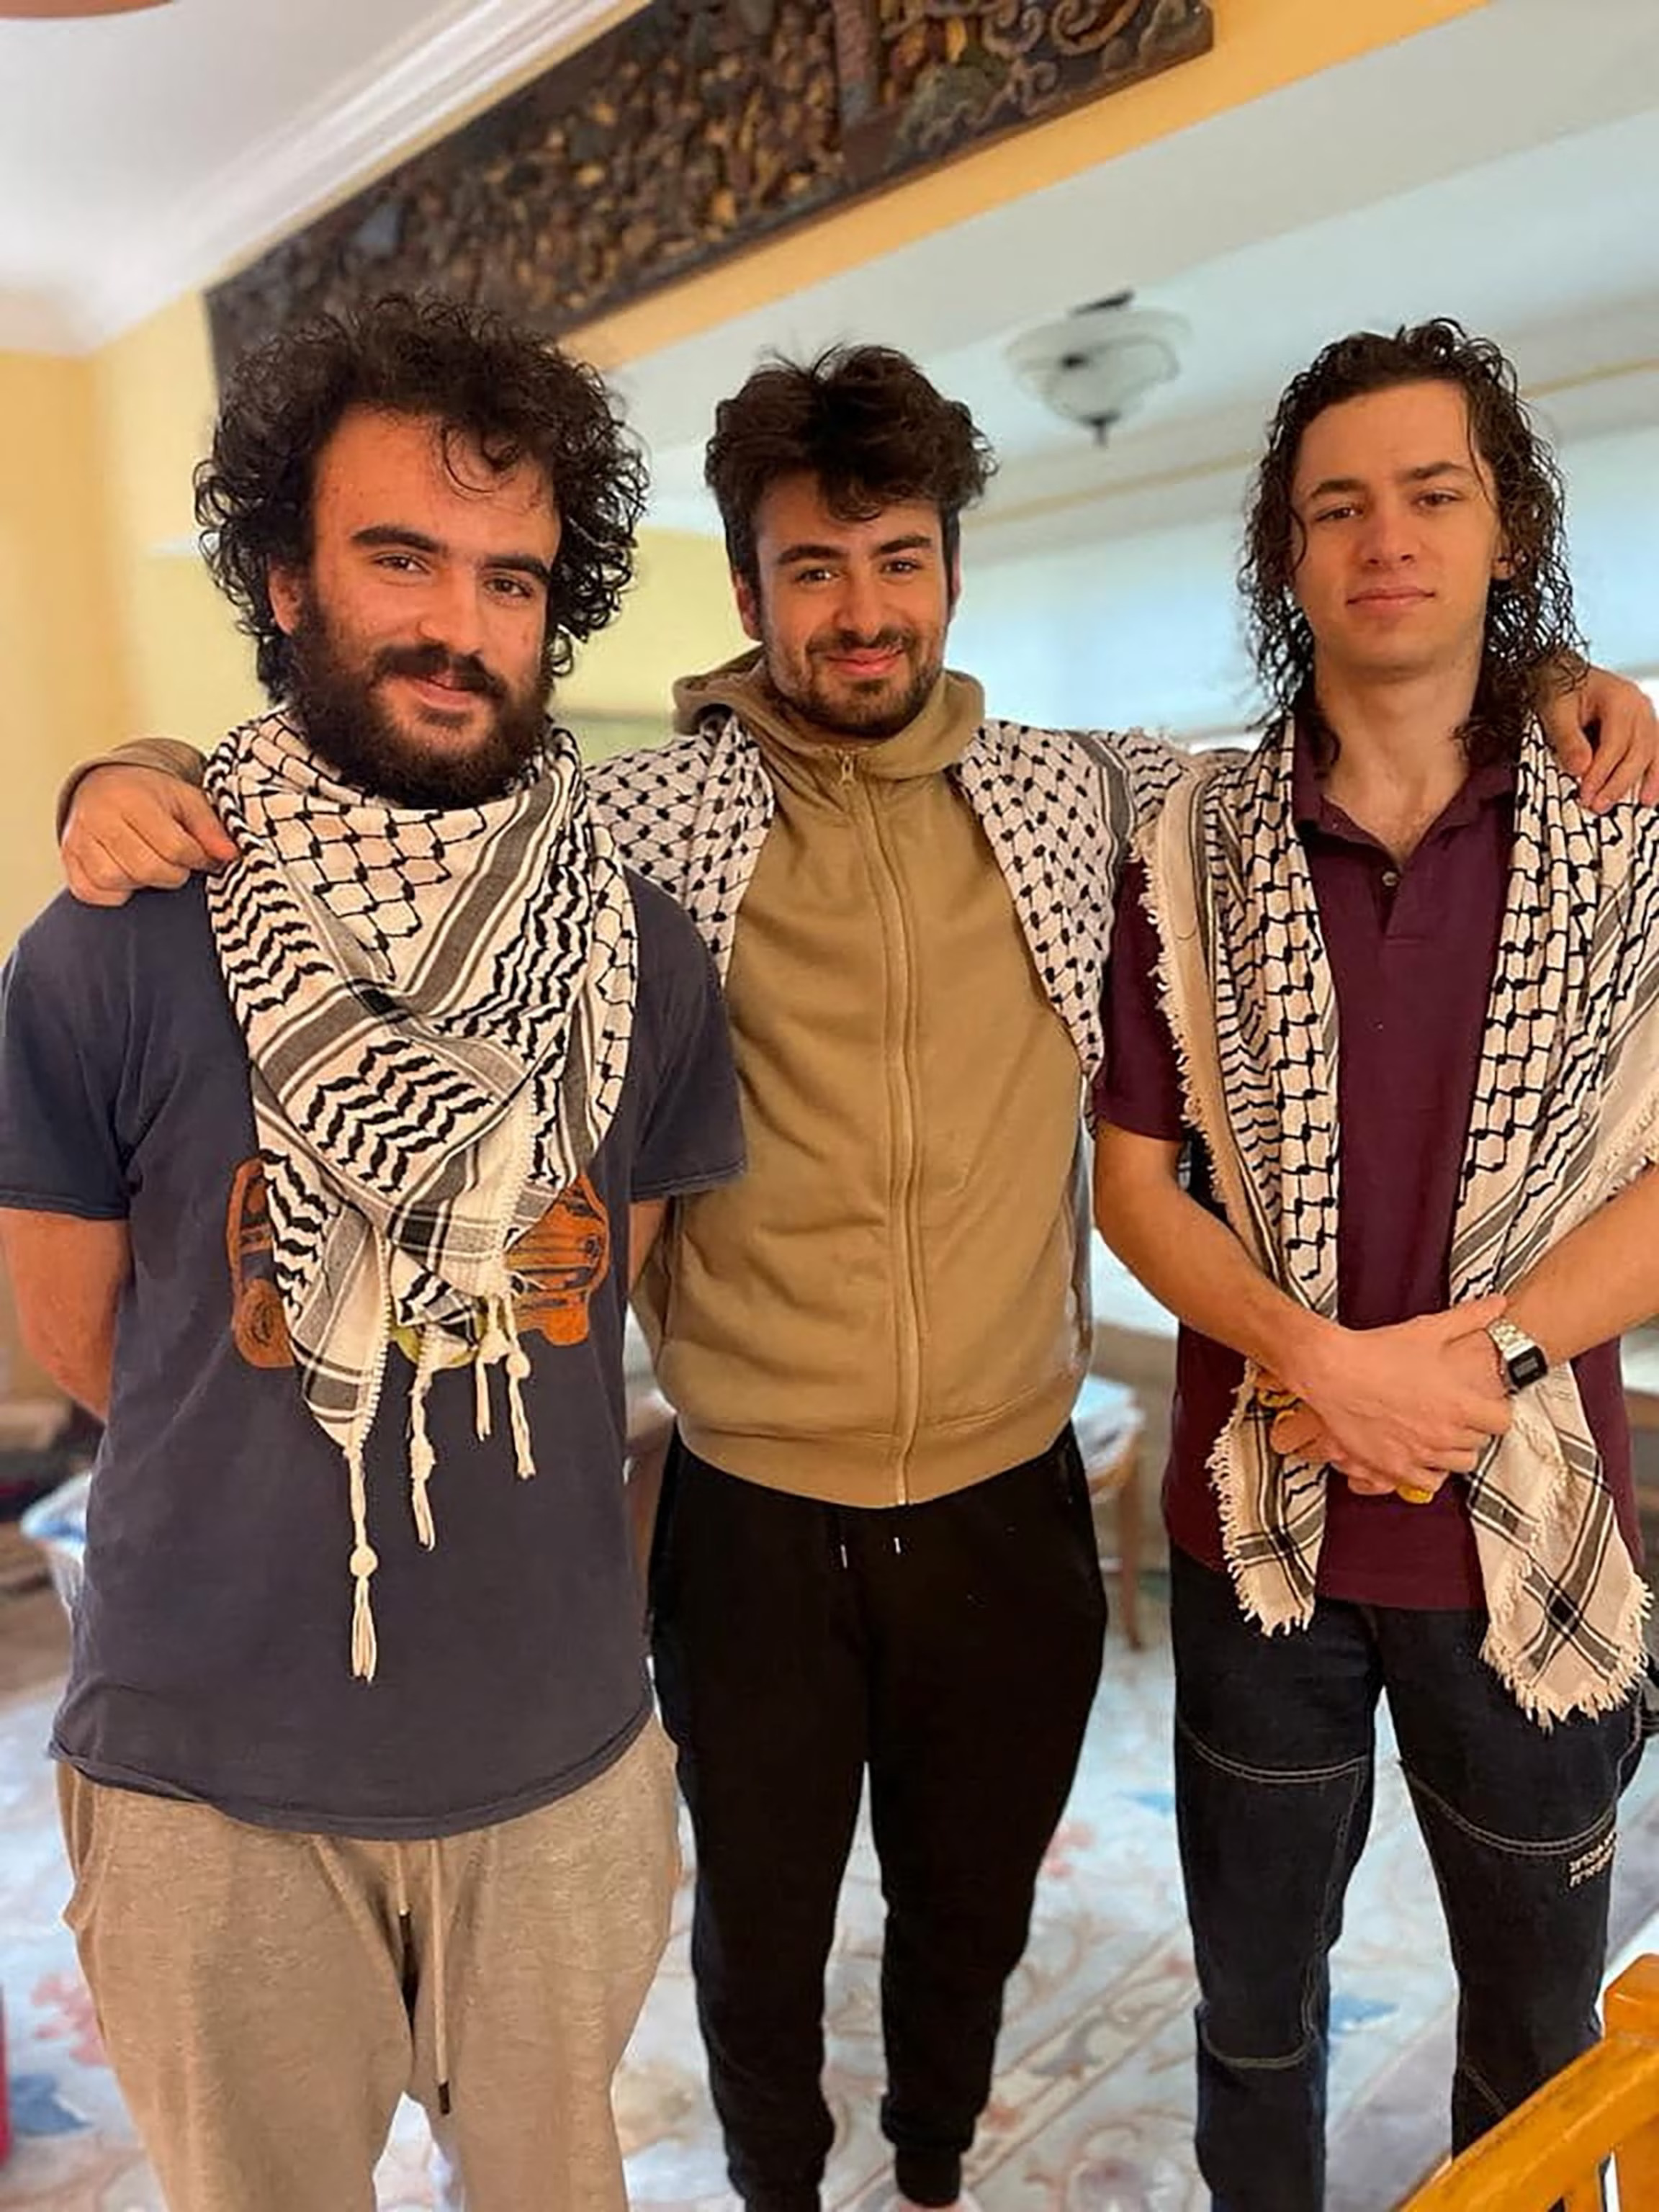 Three young men with dark hair and wearing keffiyeh black and white Palestinian scarves stand with their arms around each others’ shoulders.